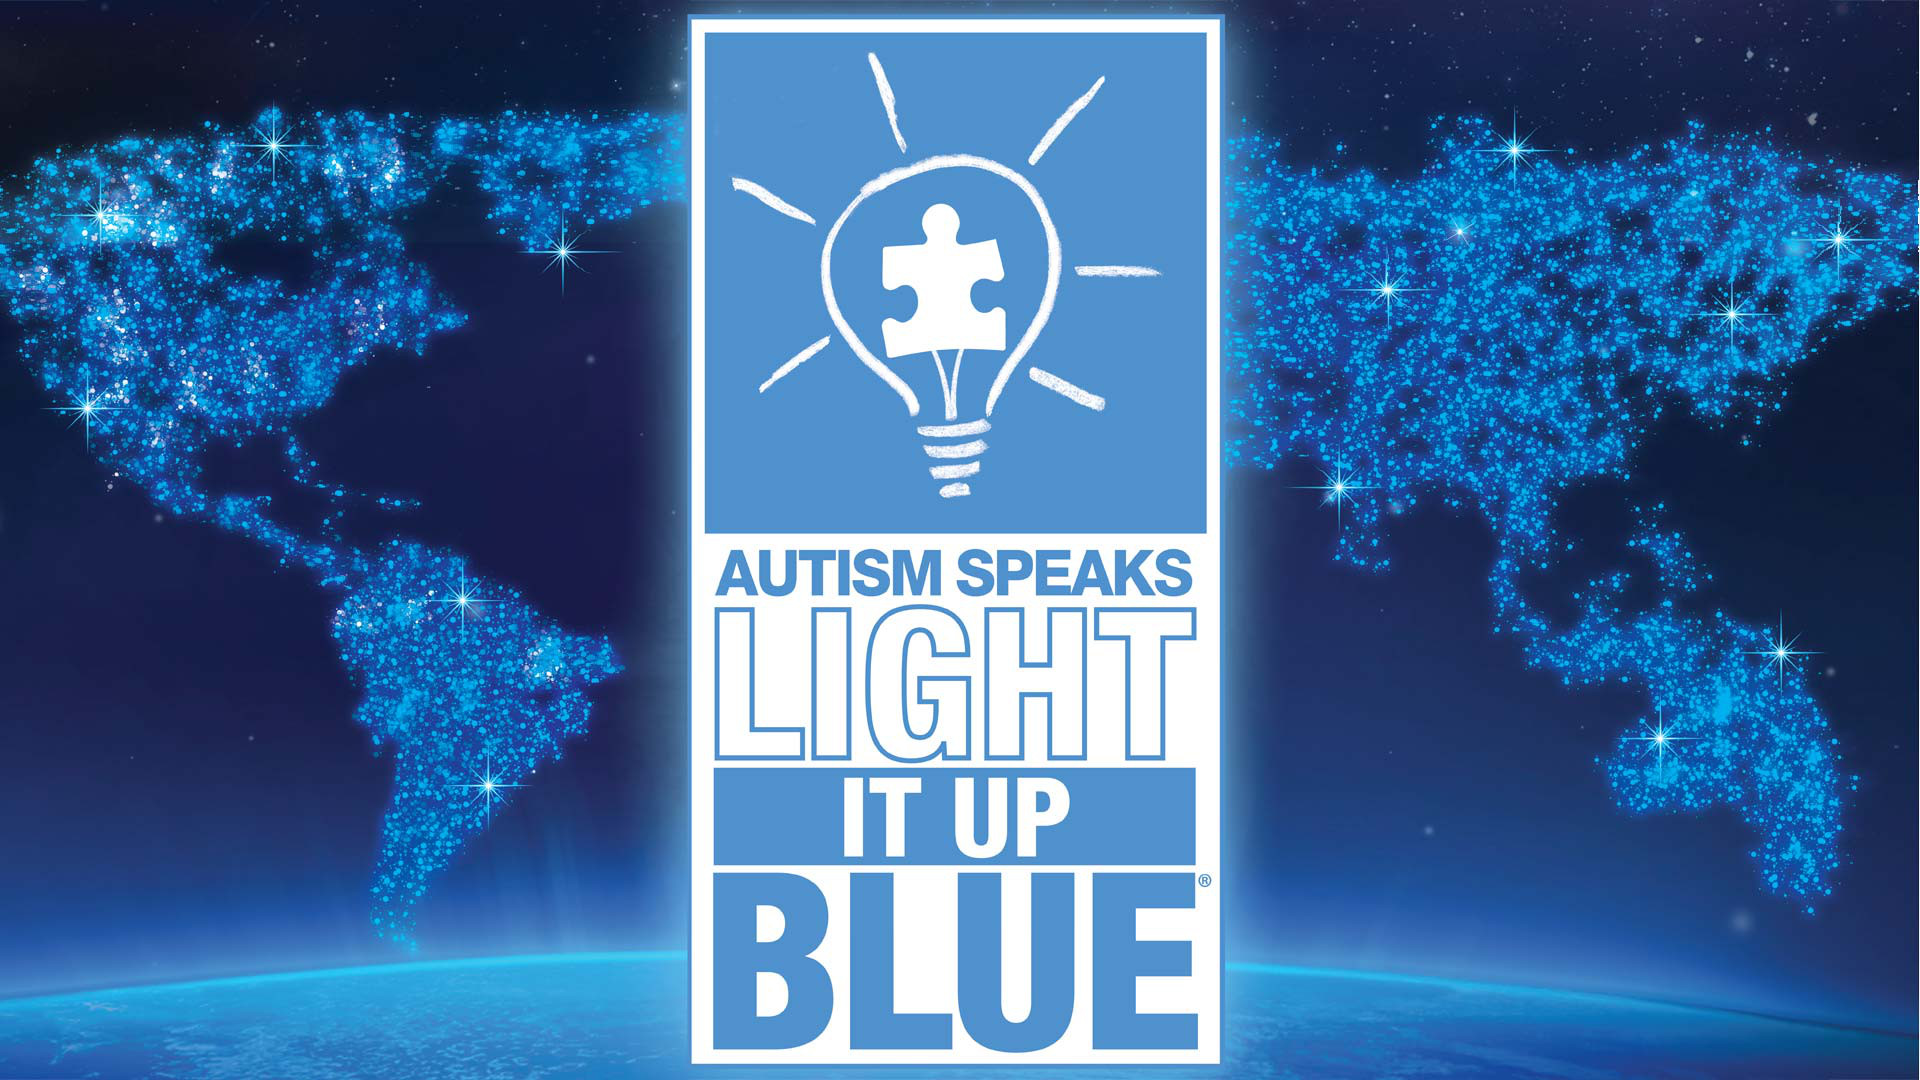 Take Part in Light It Up Blue in Honor of World Autism Awareness Day \u2013 IFC